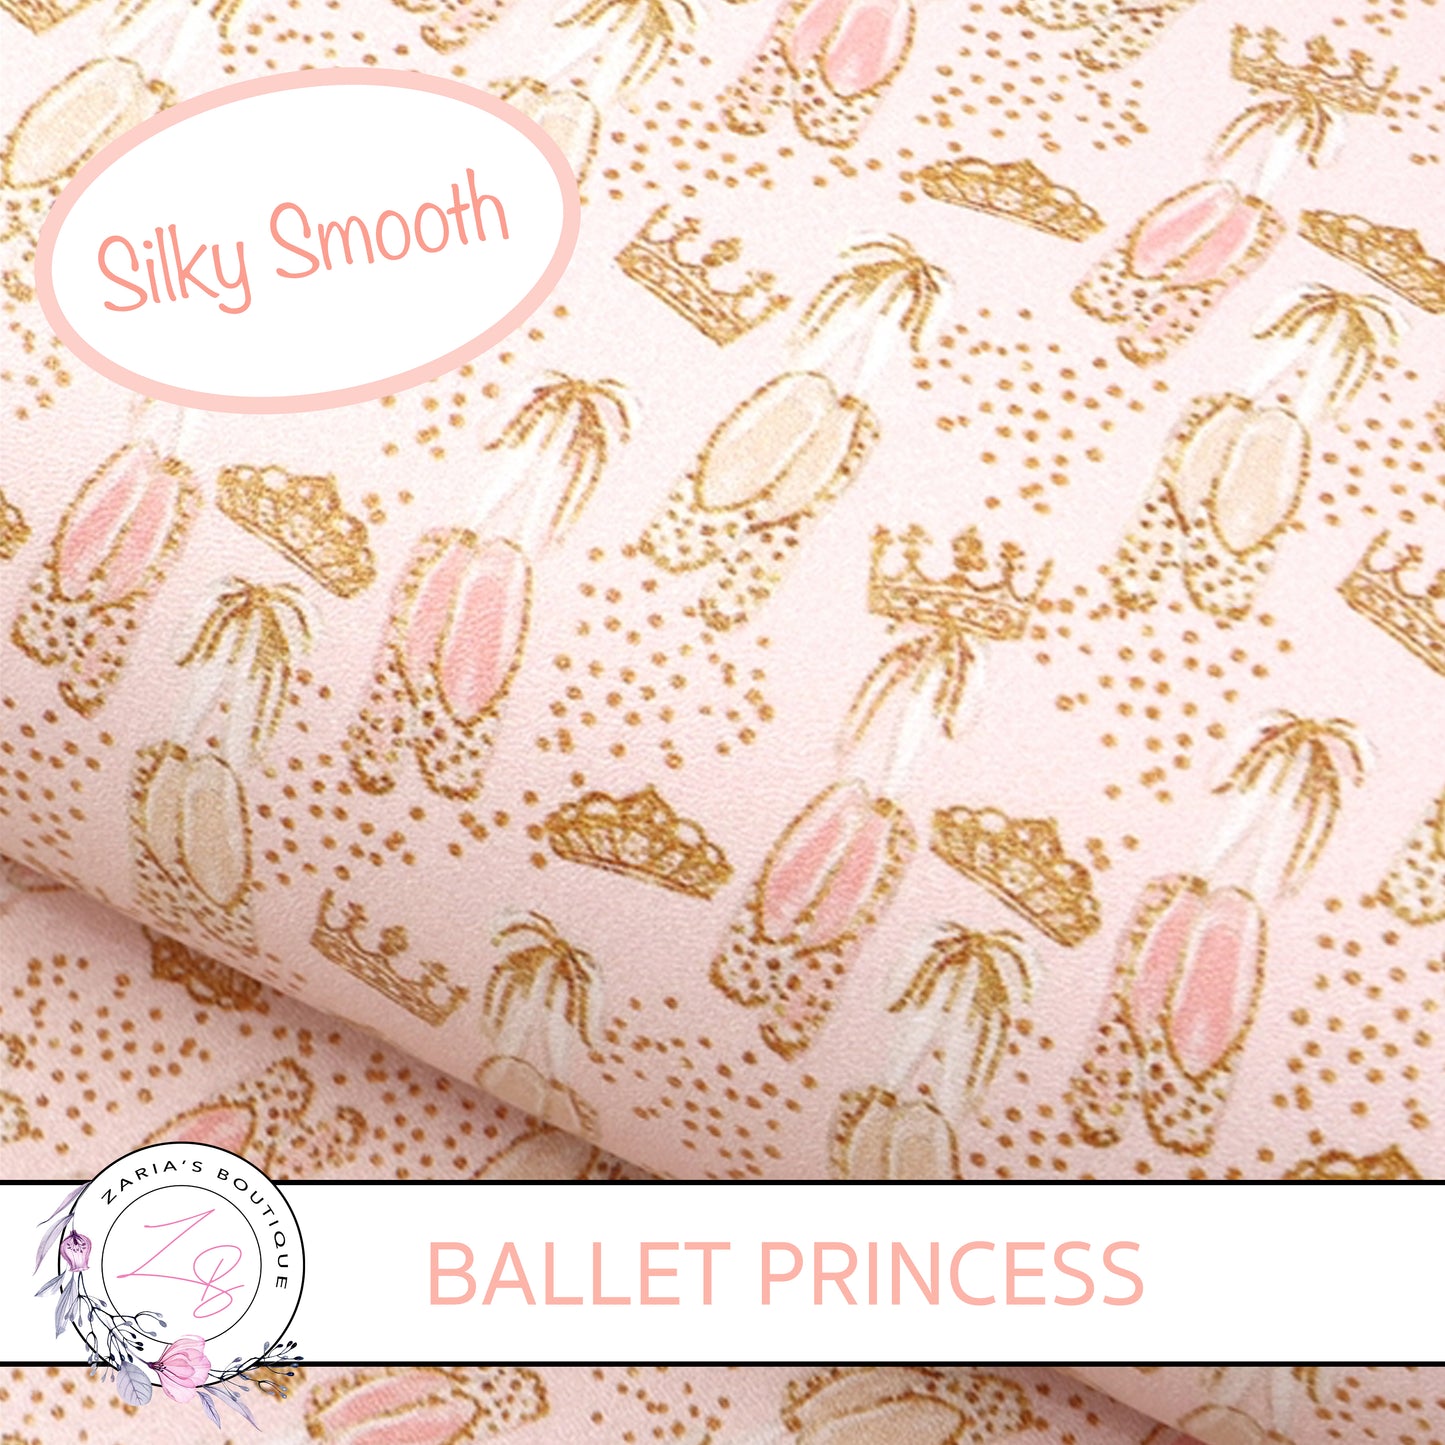 Peachy Pink & Gold Ballet Princess •  Silky Smooth Vegan Faux Leather